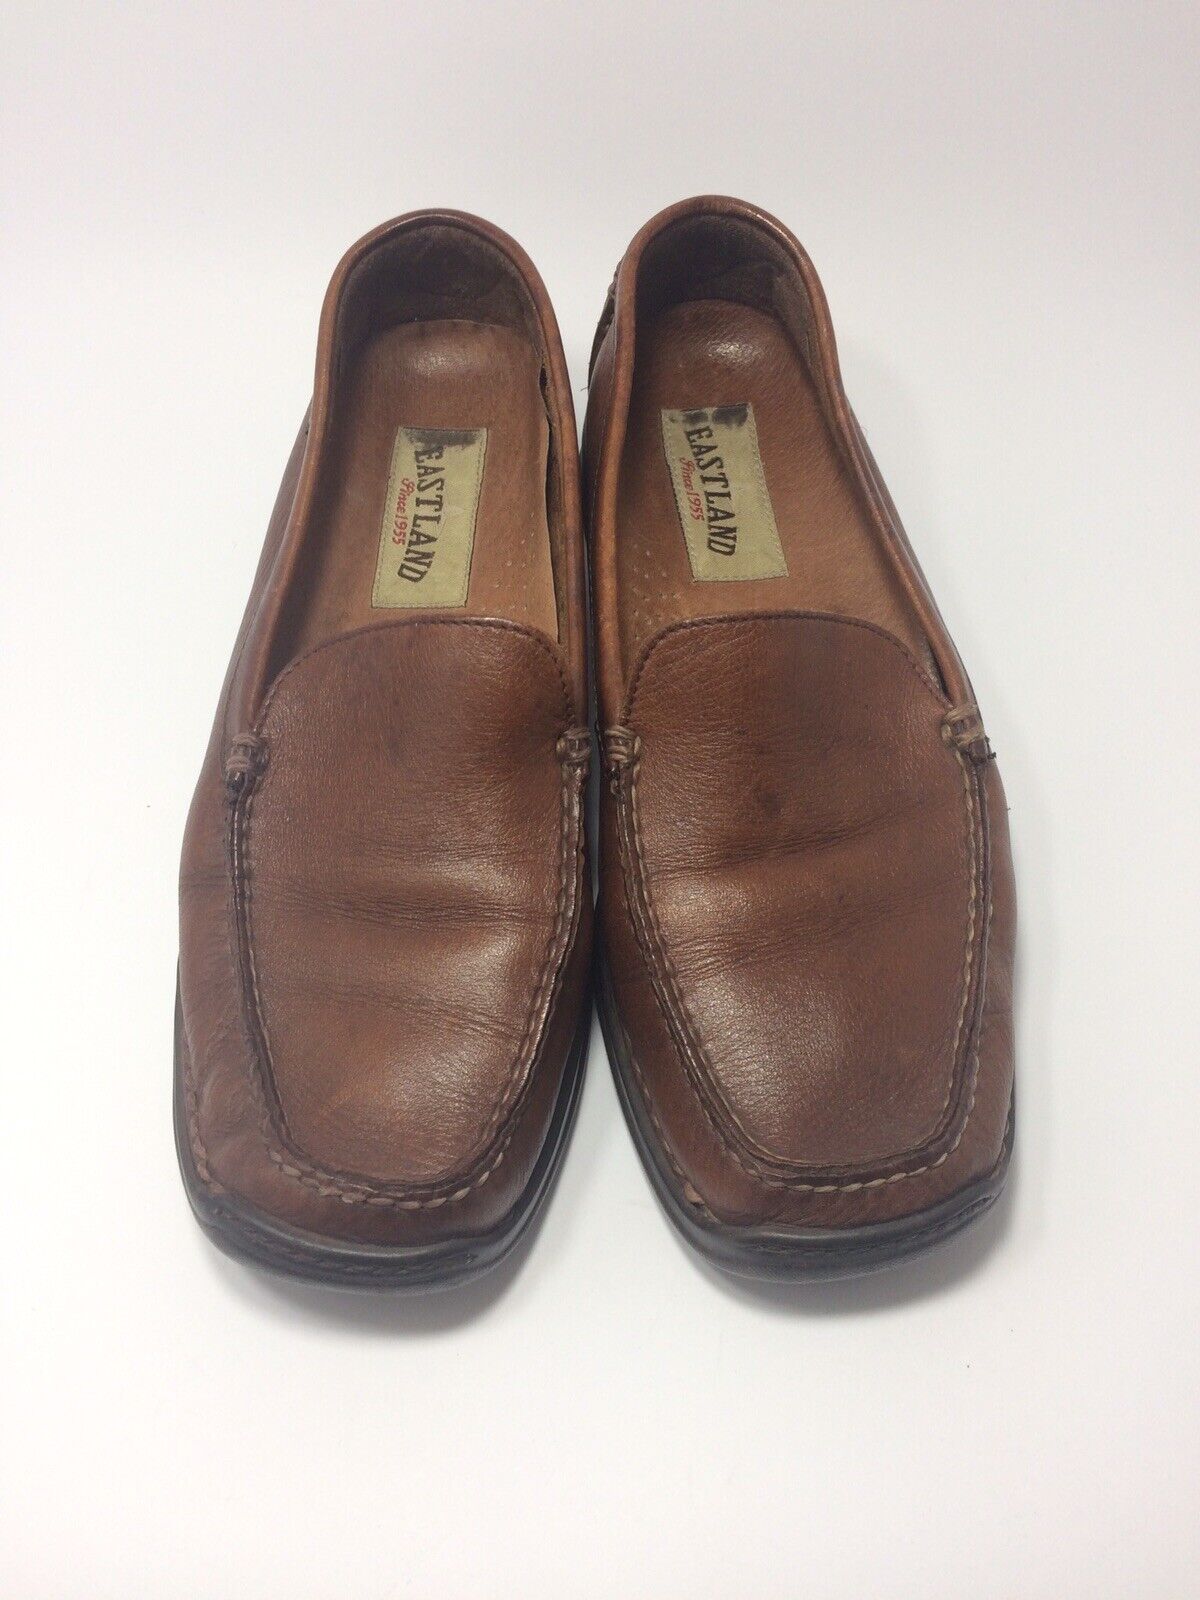 EASTLAND SINCE 1955.LEATHER UPPER ,US 9 Men’s. Very Good Condition, Pre ...